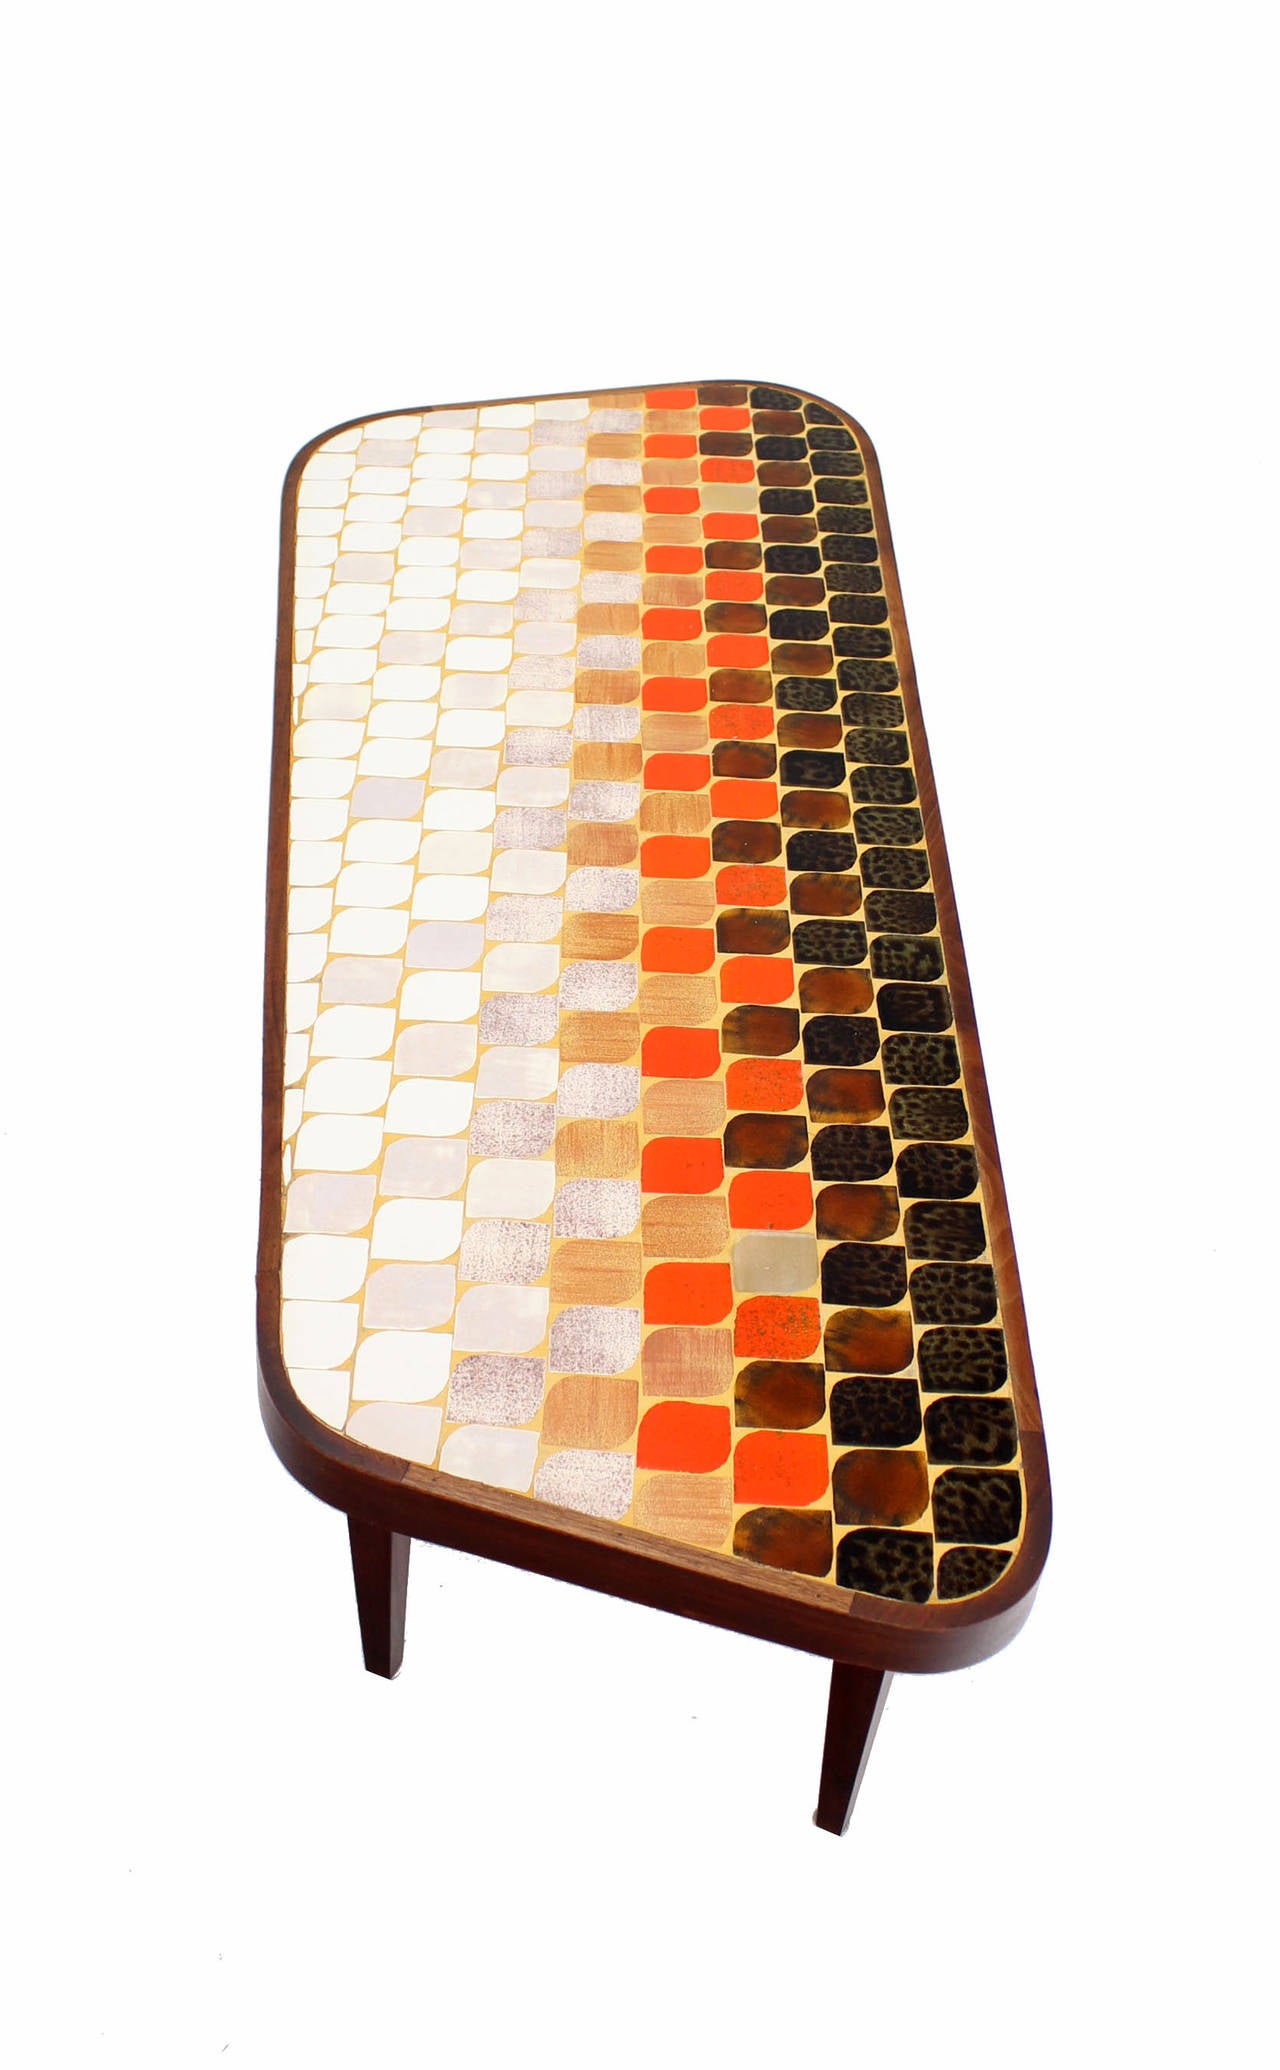 20th Century Mid-Century Modern Organic Shape Coffee Table with Tile Mosaic Top